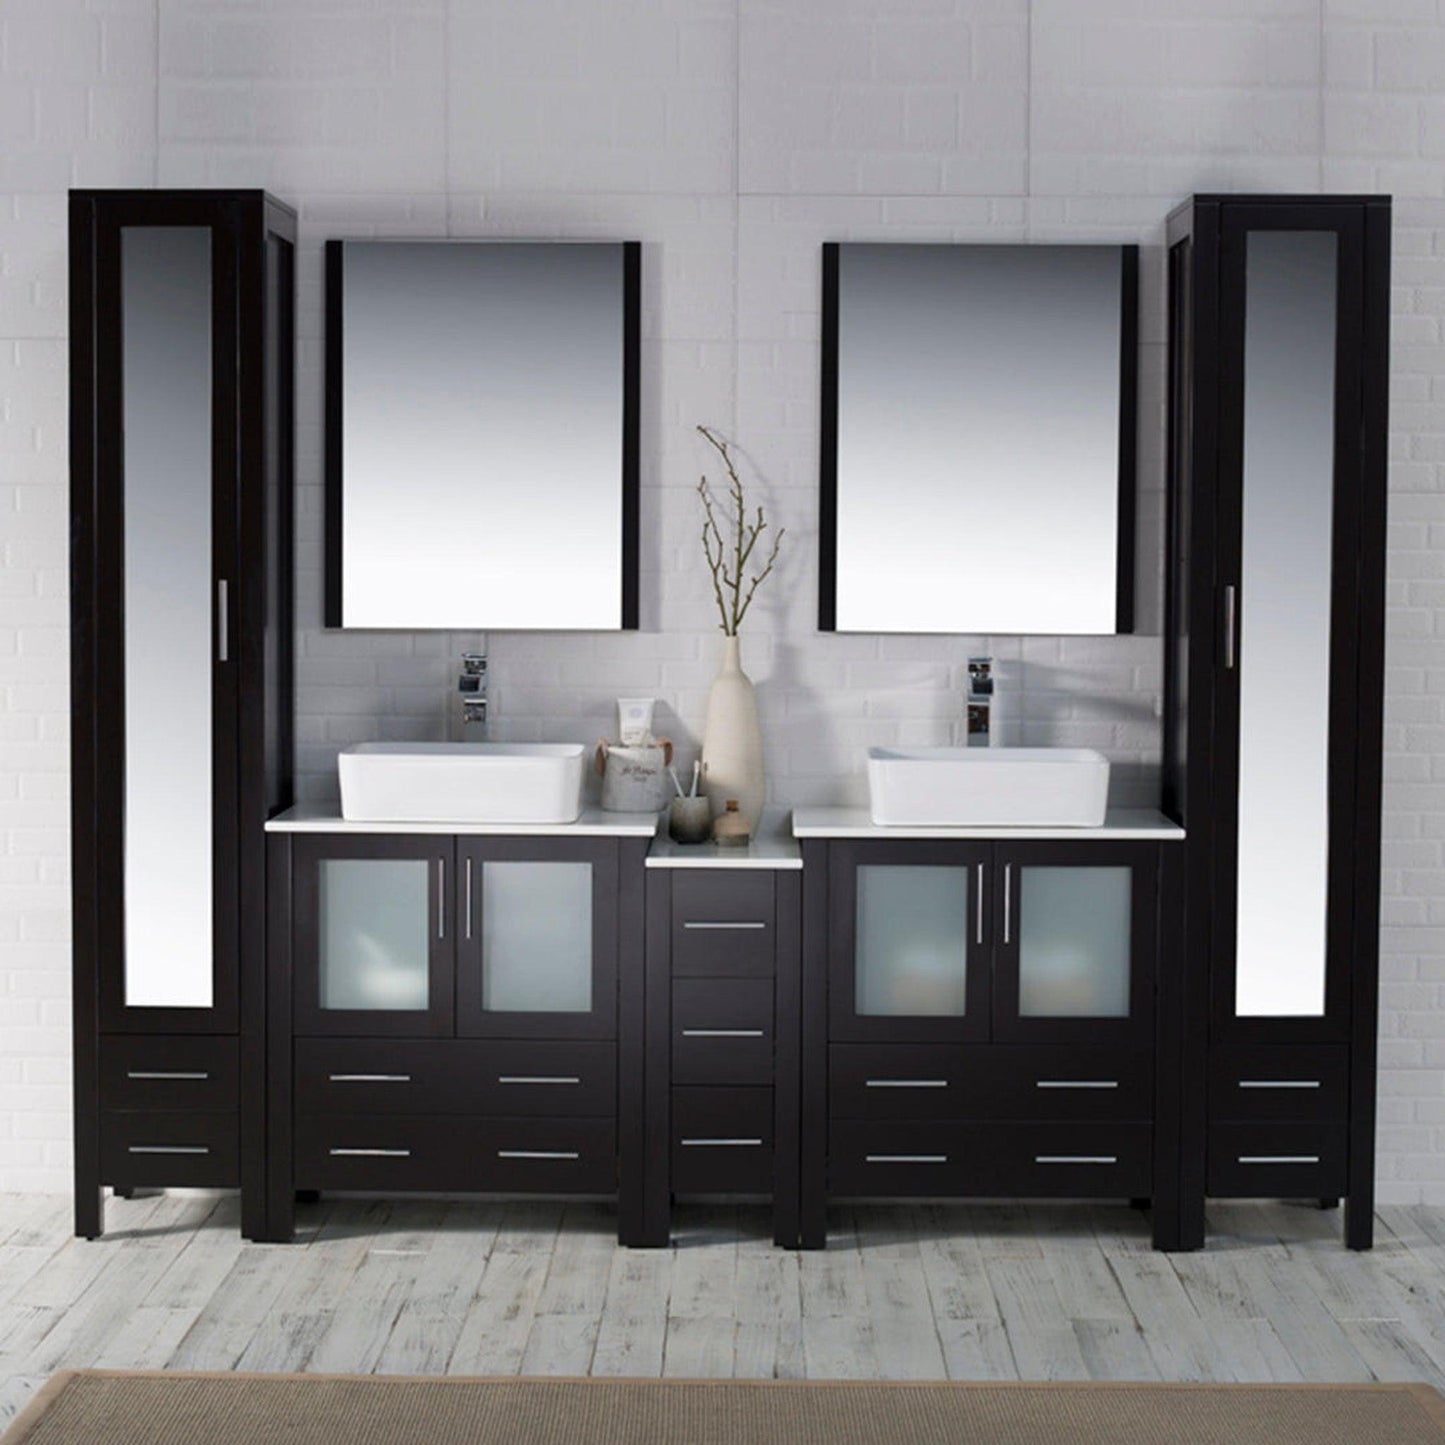 Blossom Sydney 102" Espresso Freestanding Vanity With Ceramic Double Vessel Sinks and Mirror